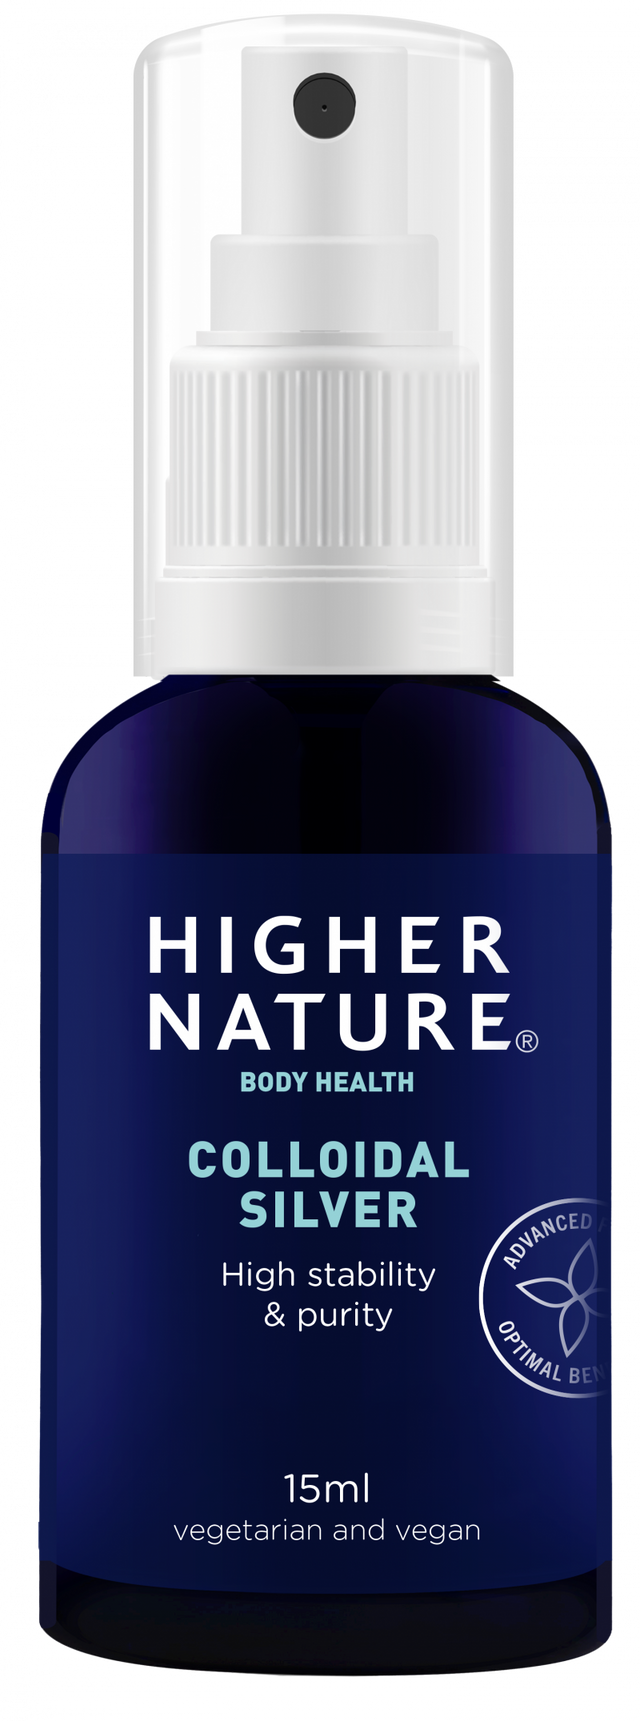 Higher Nature High Stability Colloidal Silver, 15ml